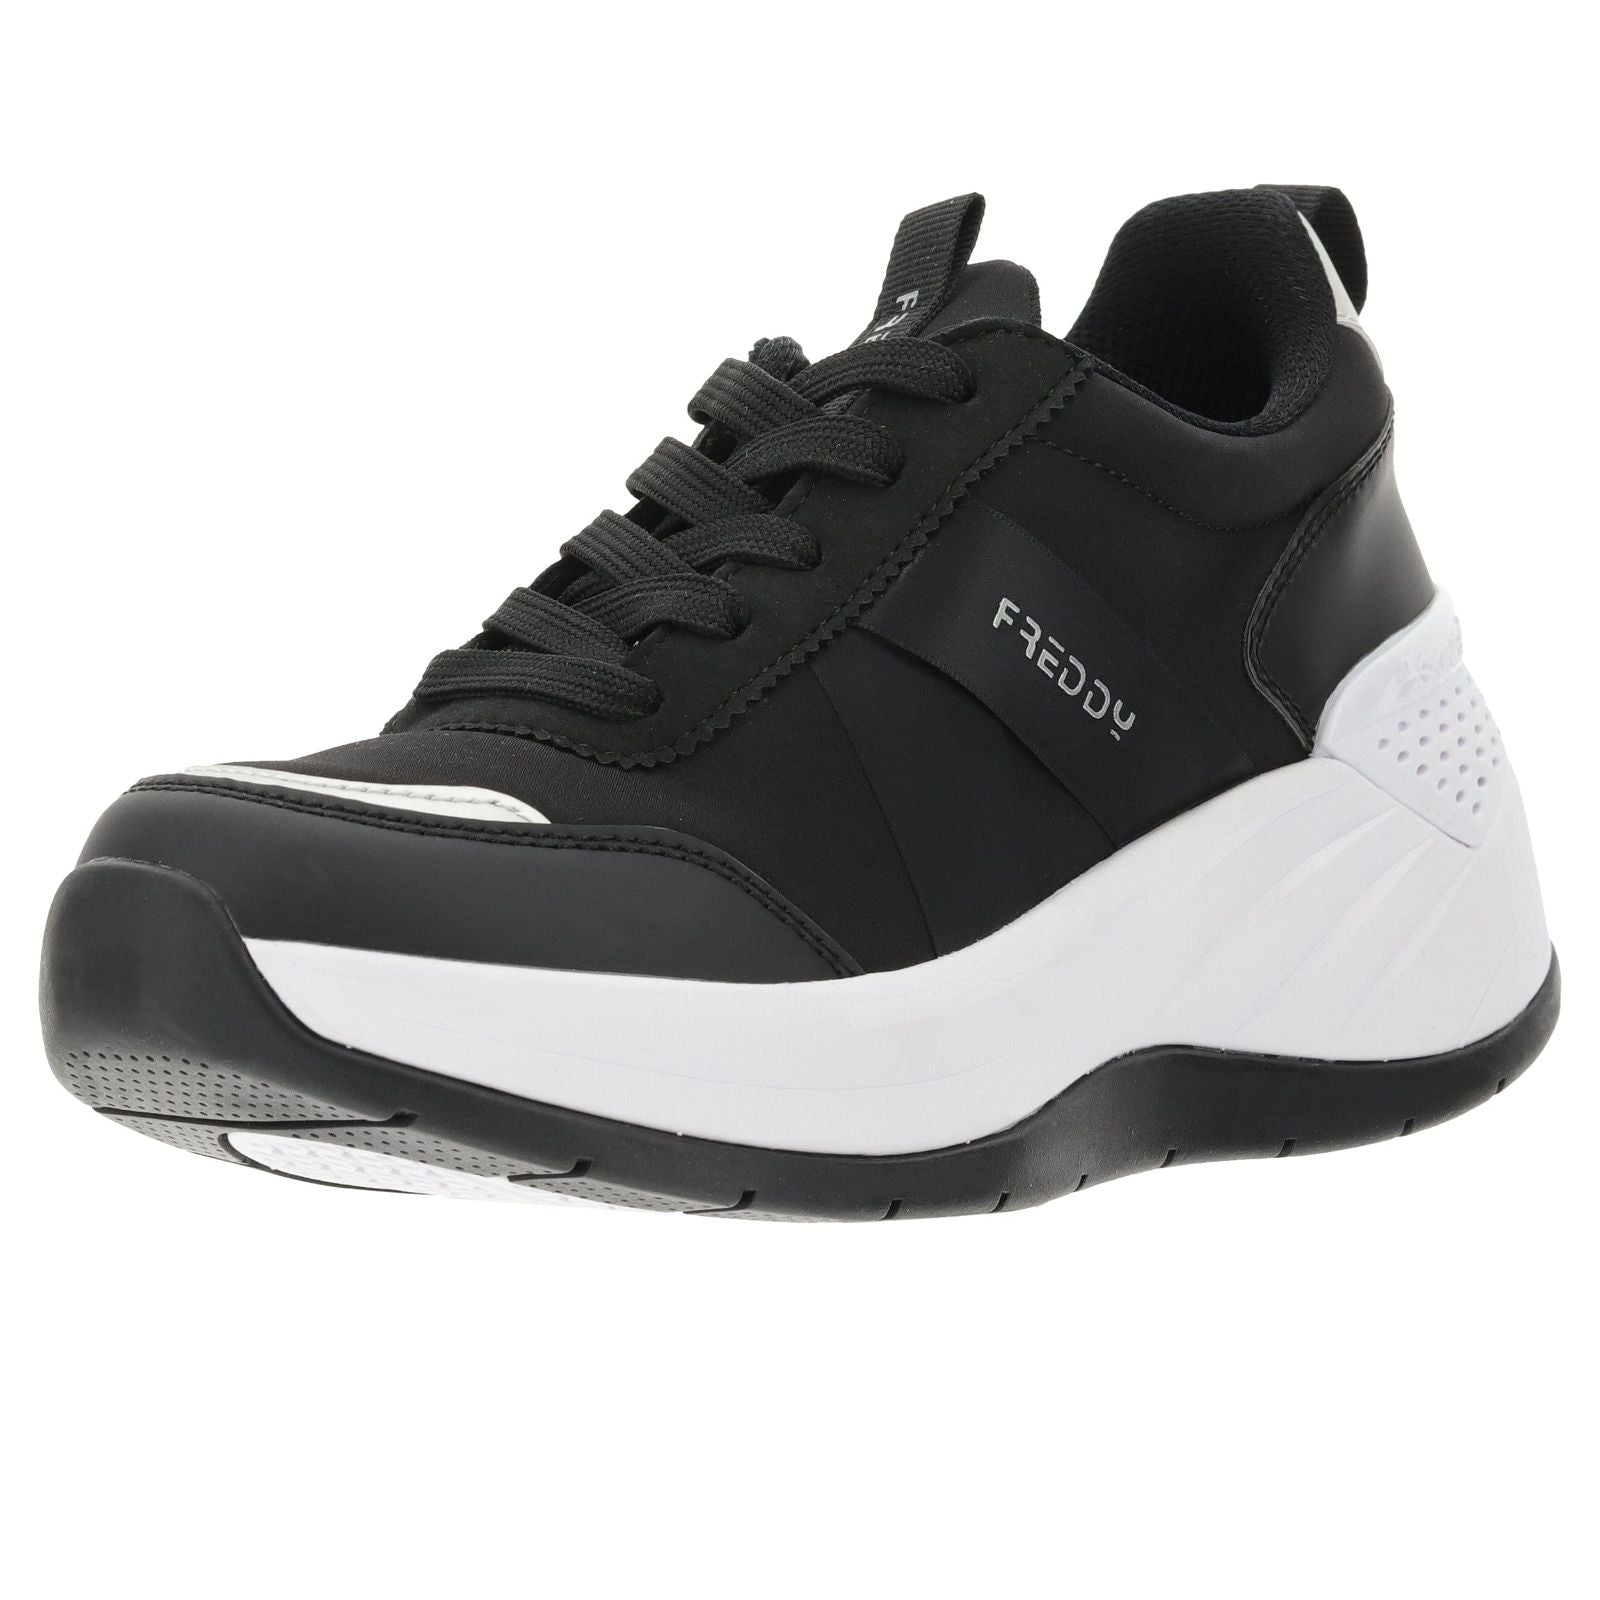 Women's Sneakers with Skinair® Technology - Black 1